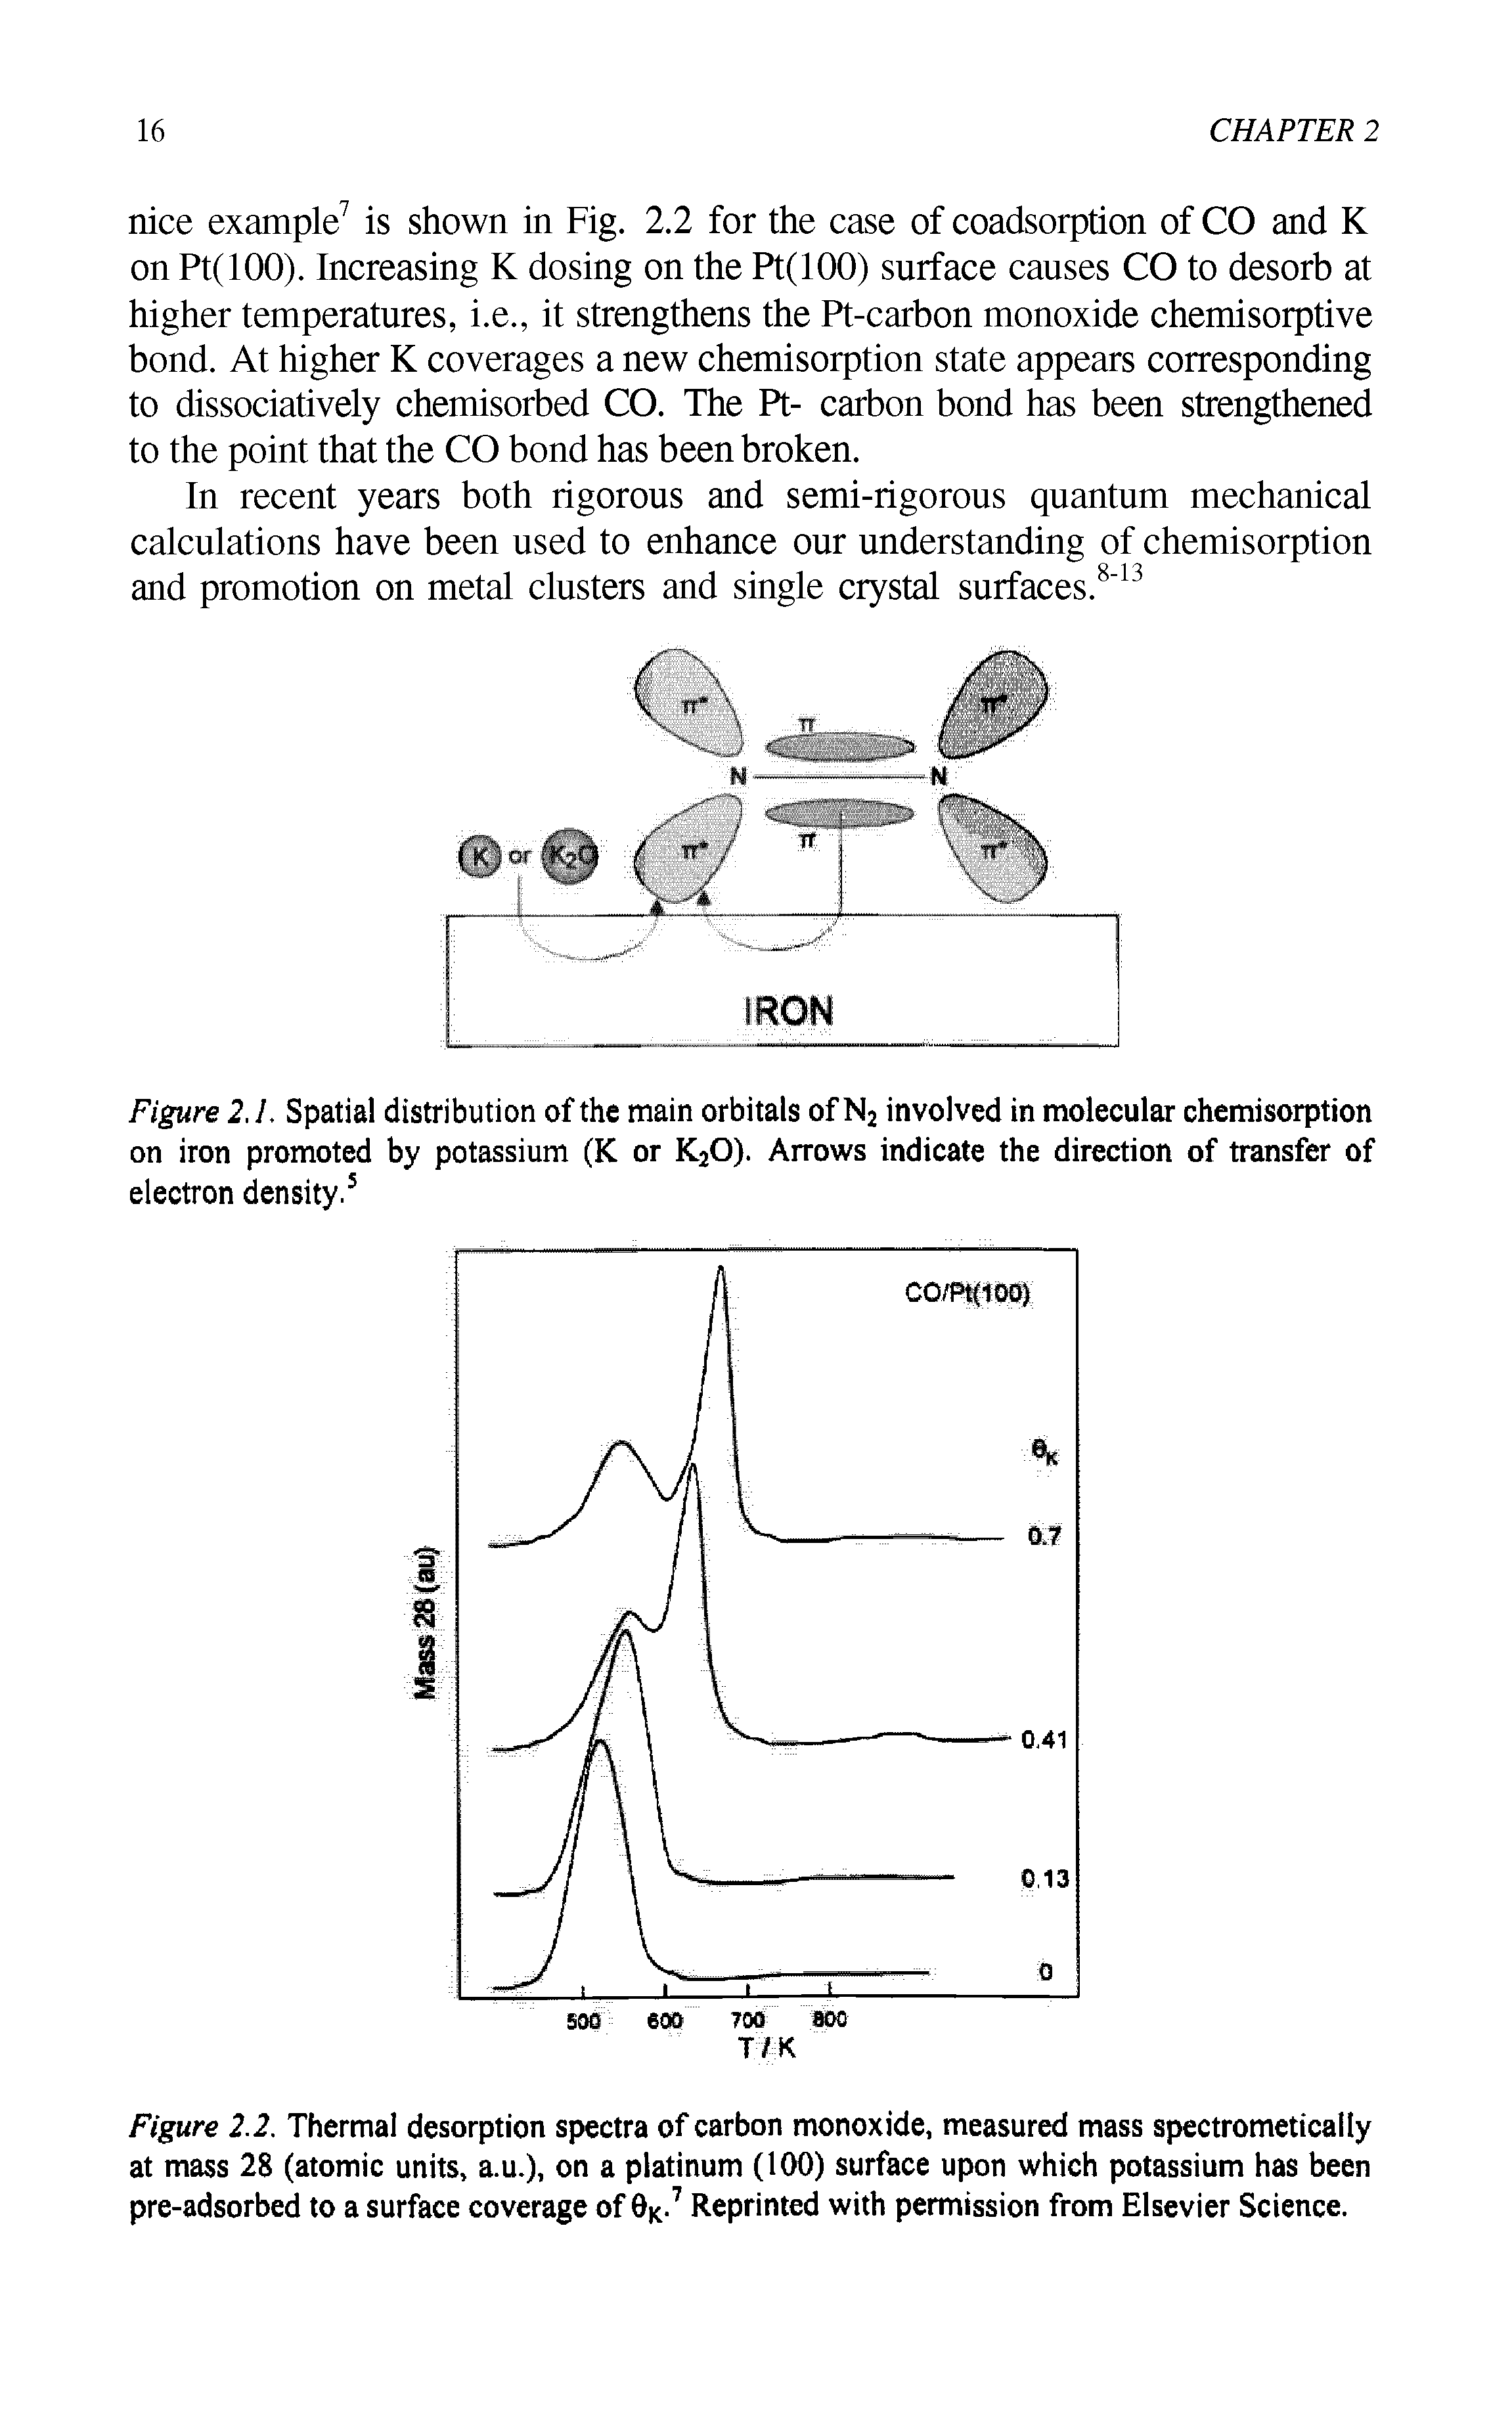 Figure 2.2. Thermal desorption spectra of carbon monoxide, measured mass spectrometically at mass 28 (atomic units, a.u.), on a platinum (100) surface upon which potassium has been pre-adsorbed to a surface coverage of 0K.7 Reprinted with permission from Elsevier Science.